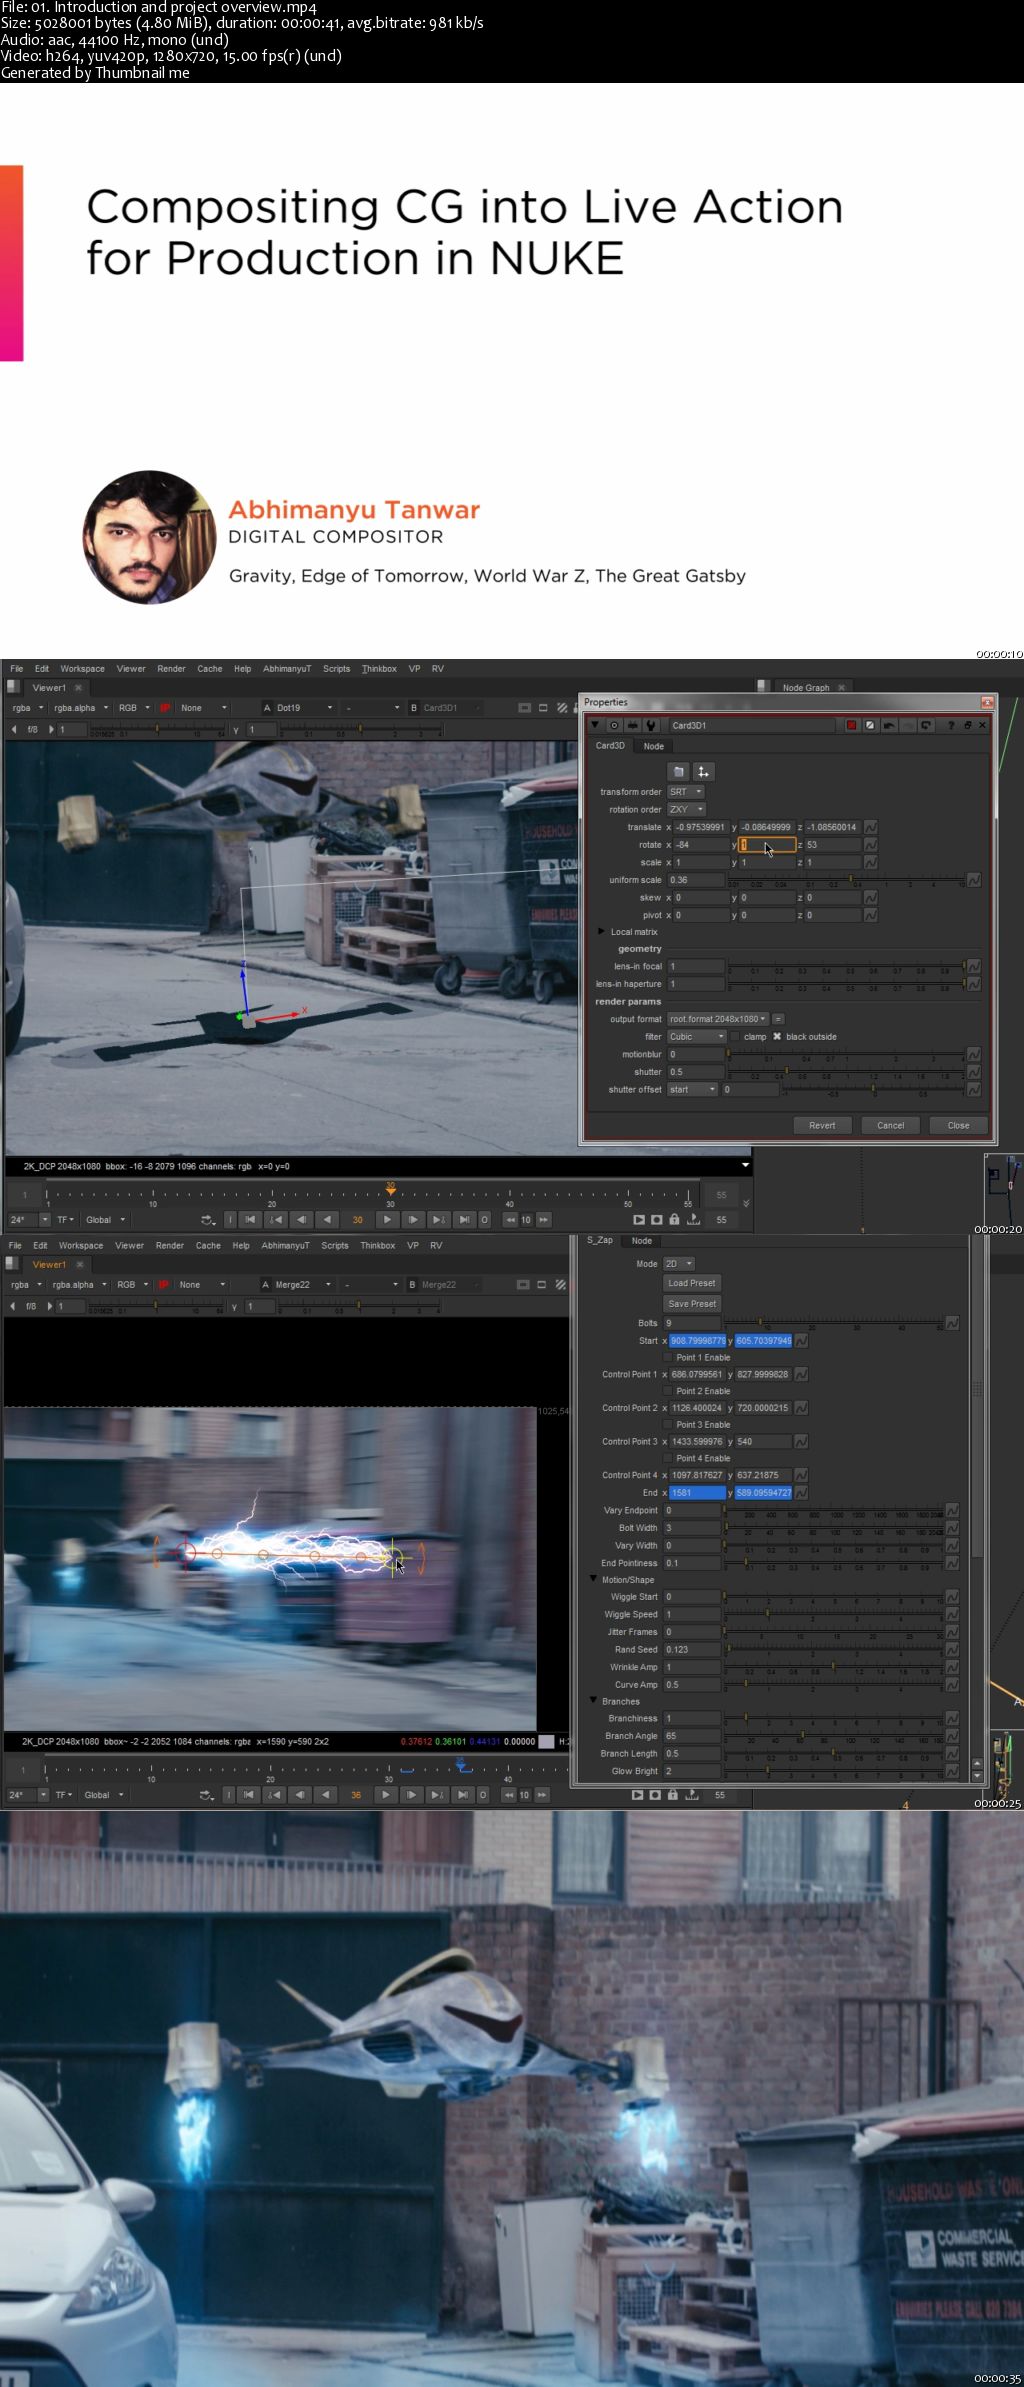 Compositing CG into Live Action for Production in NUKE